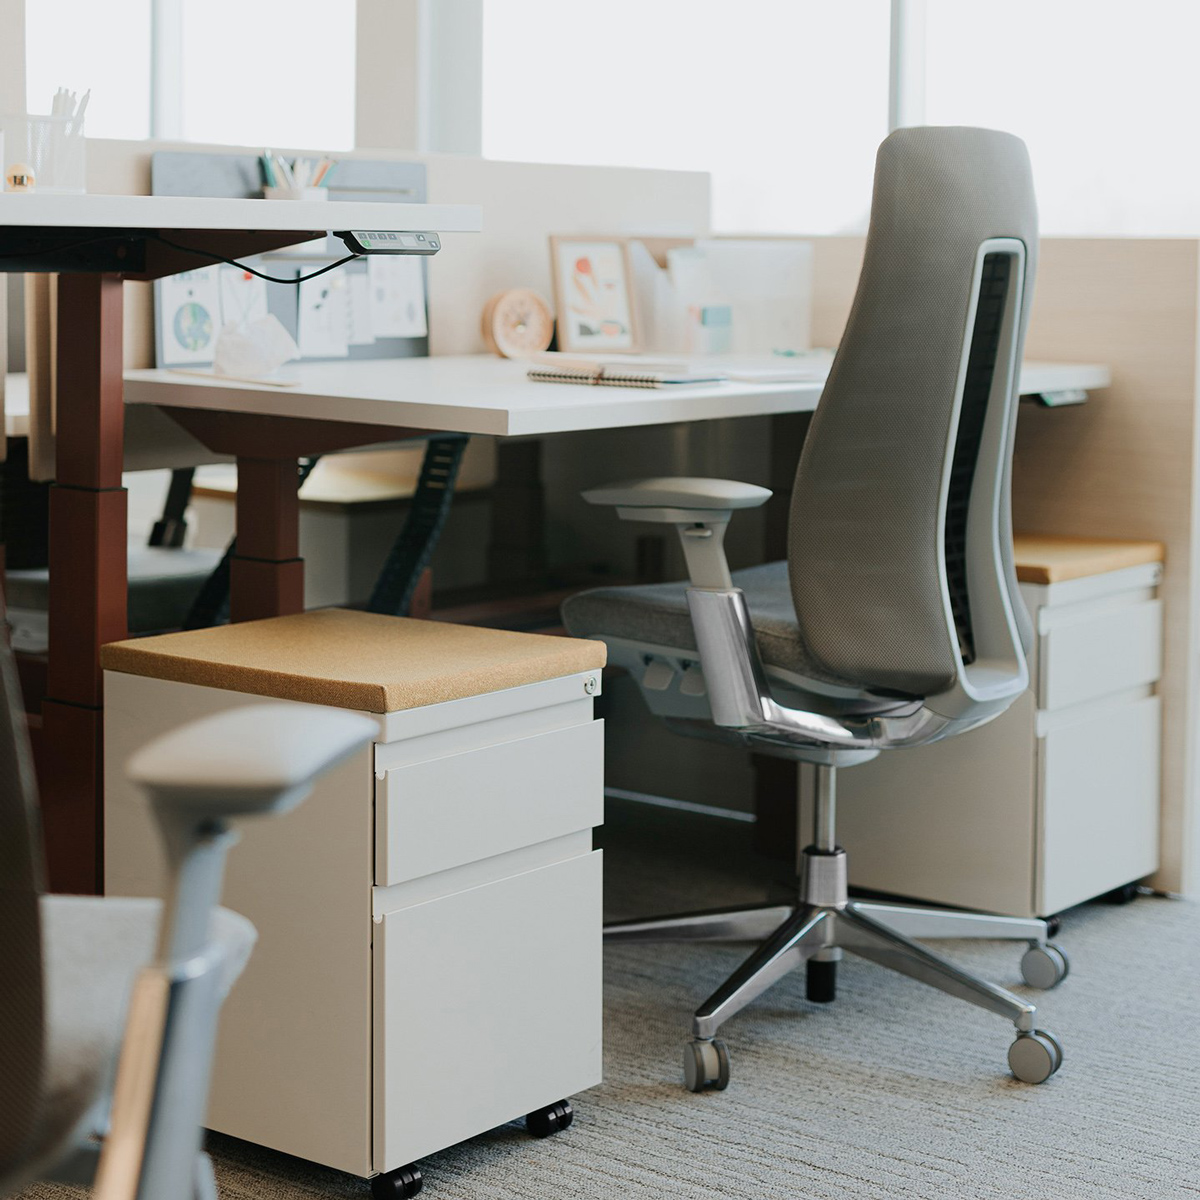 Office chair at a desk with two small filing cabinets